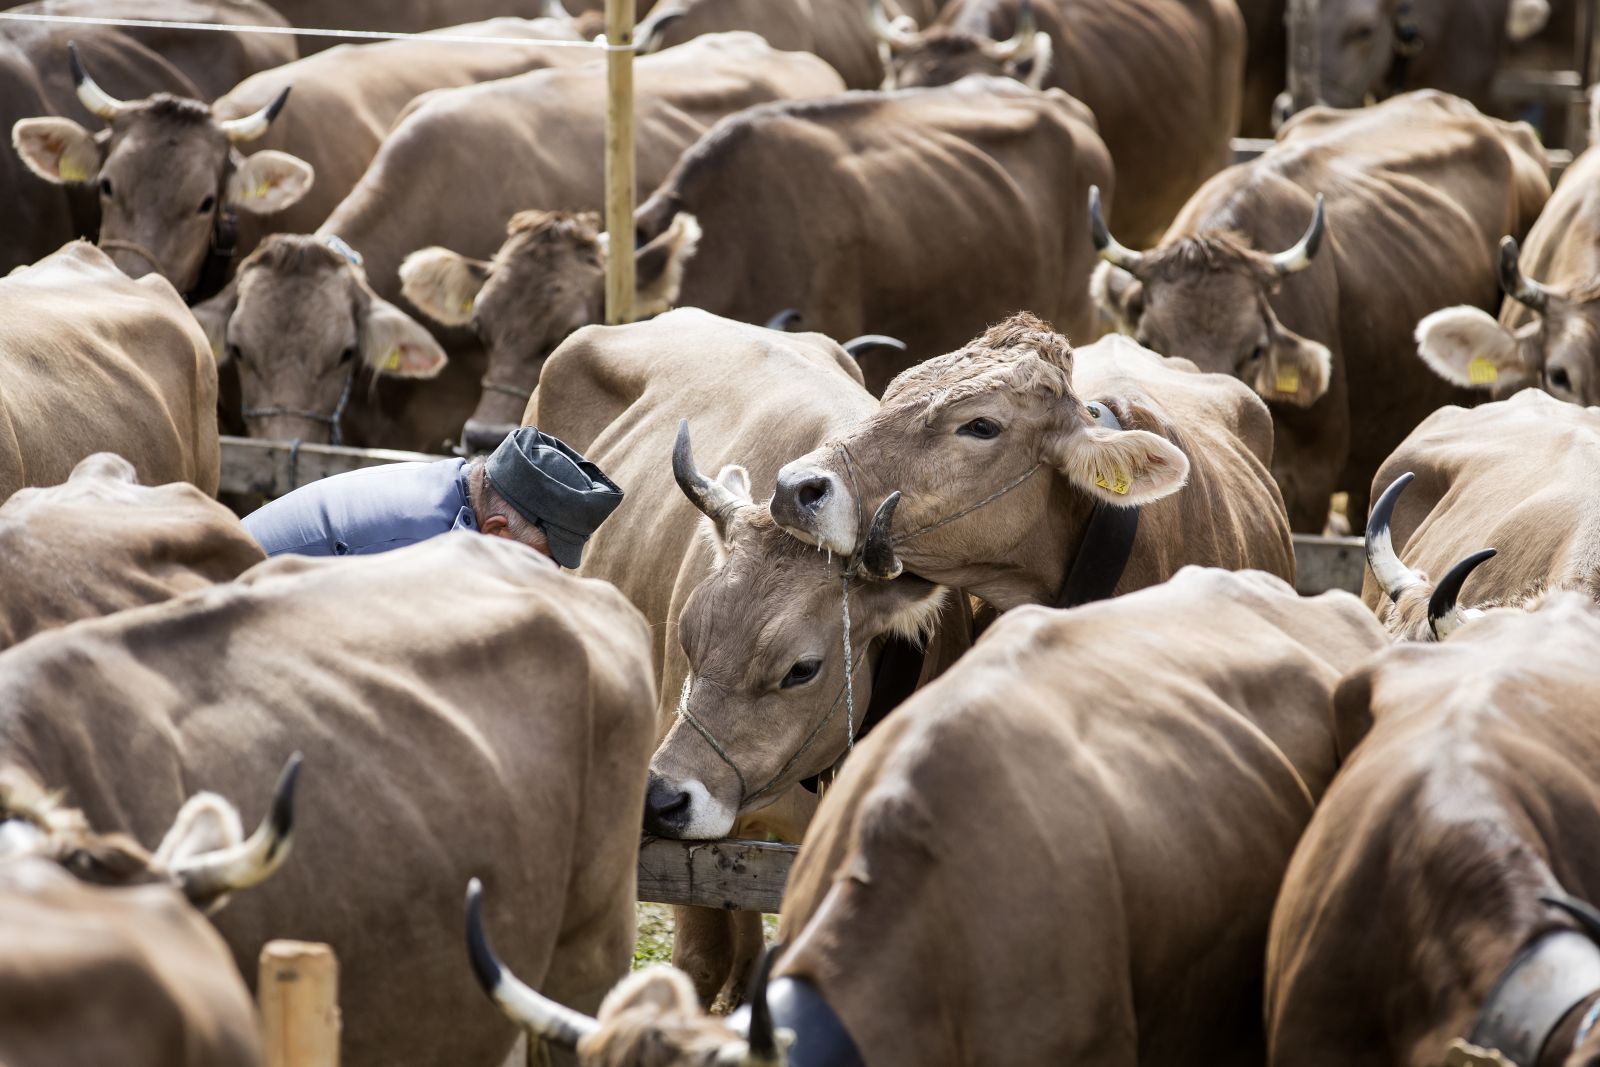 Animal husbandry must become more sustainable – cows on display in Switzerland.